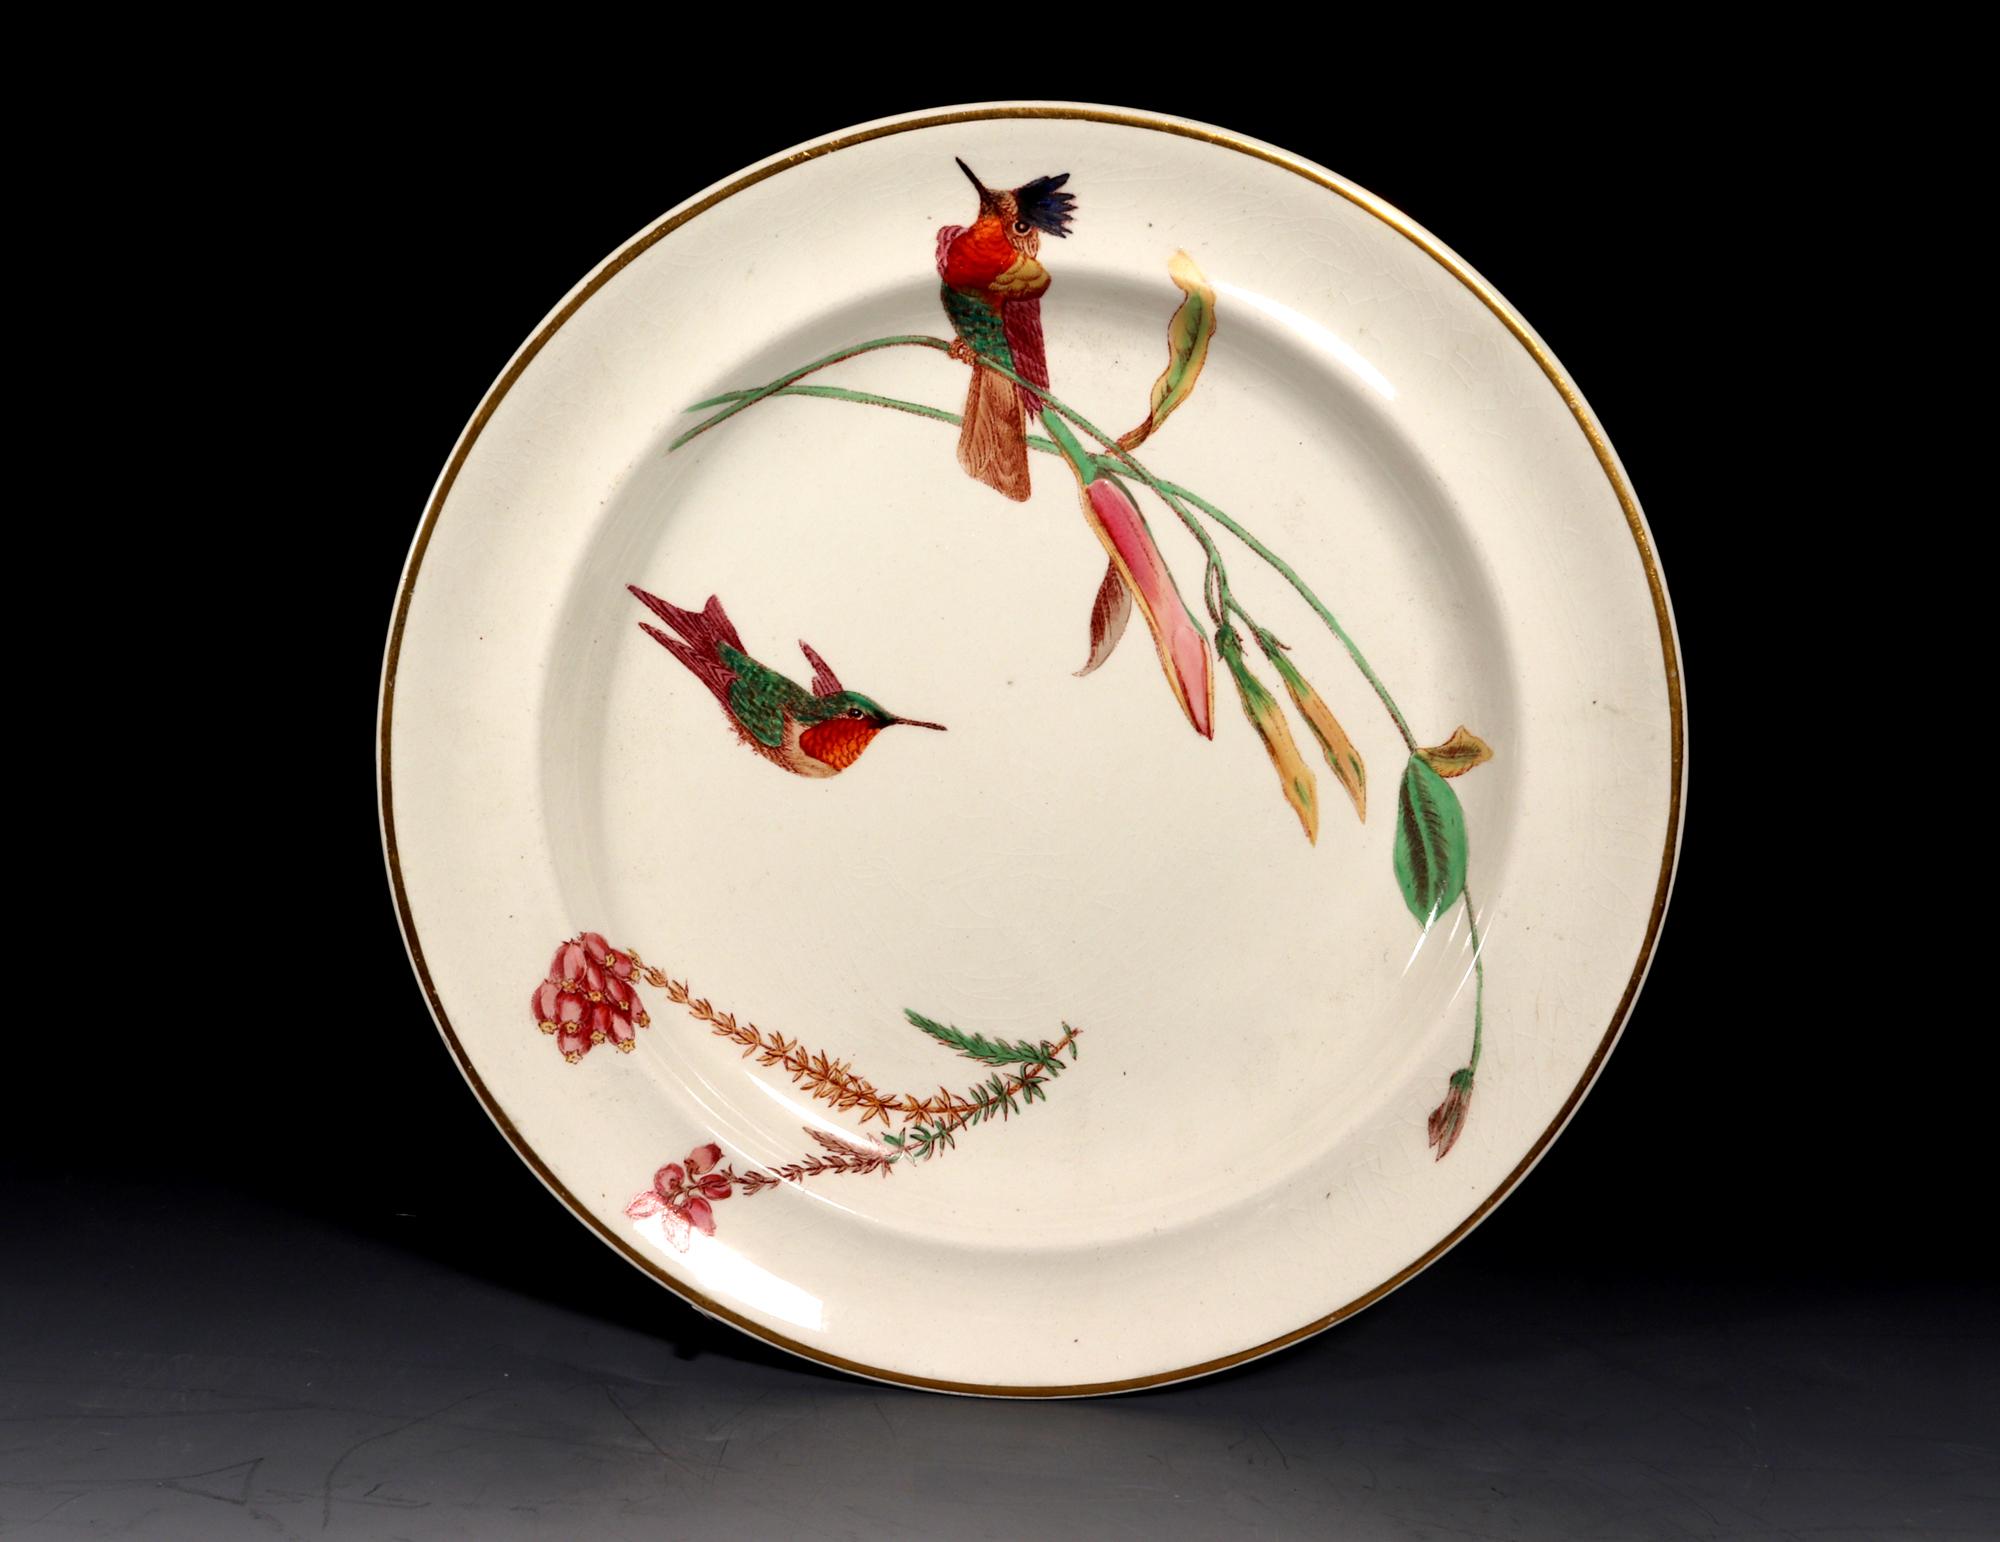 Charming!
Wedgwood Creamware Plates,
Hummingbird Butterfly & Flowers Pattern, 
Pattern No. 7961,
Circa 1868.

The set of three absolutely charming creamware Wedgwood plates are painted with a pattern known as the Hummingbird & Flowers pattern.  Each